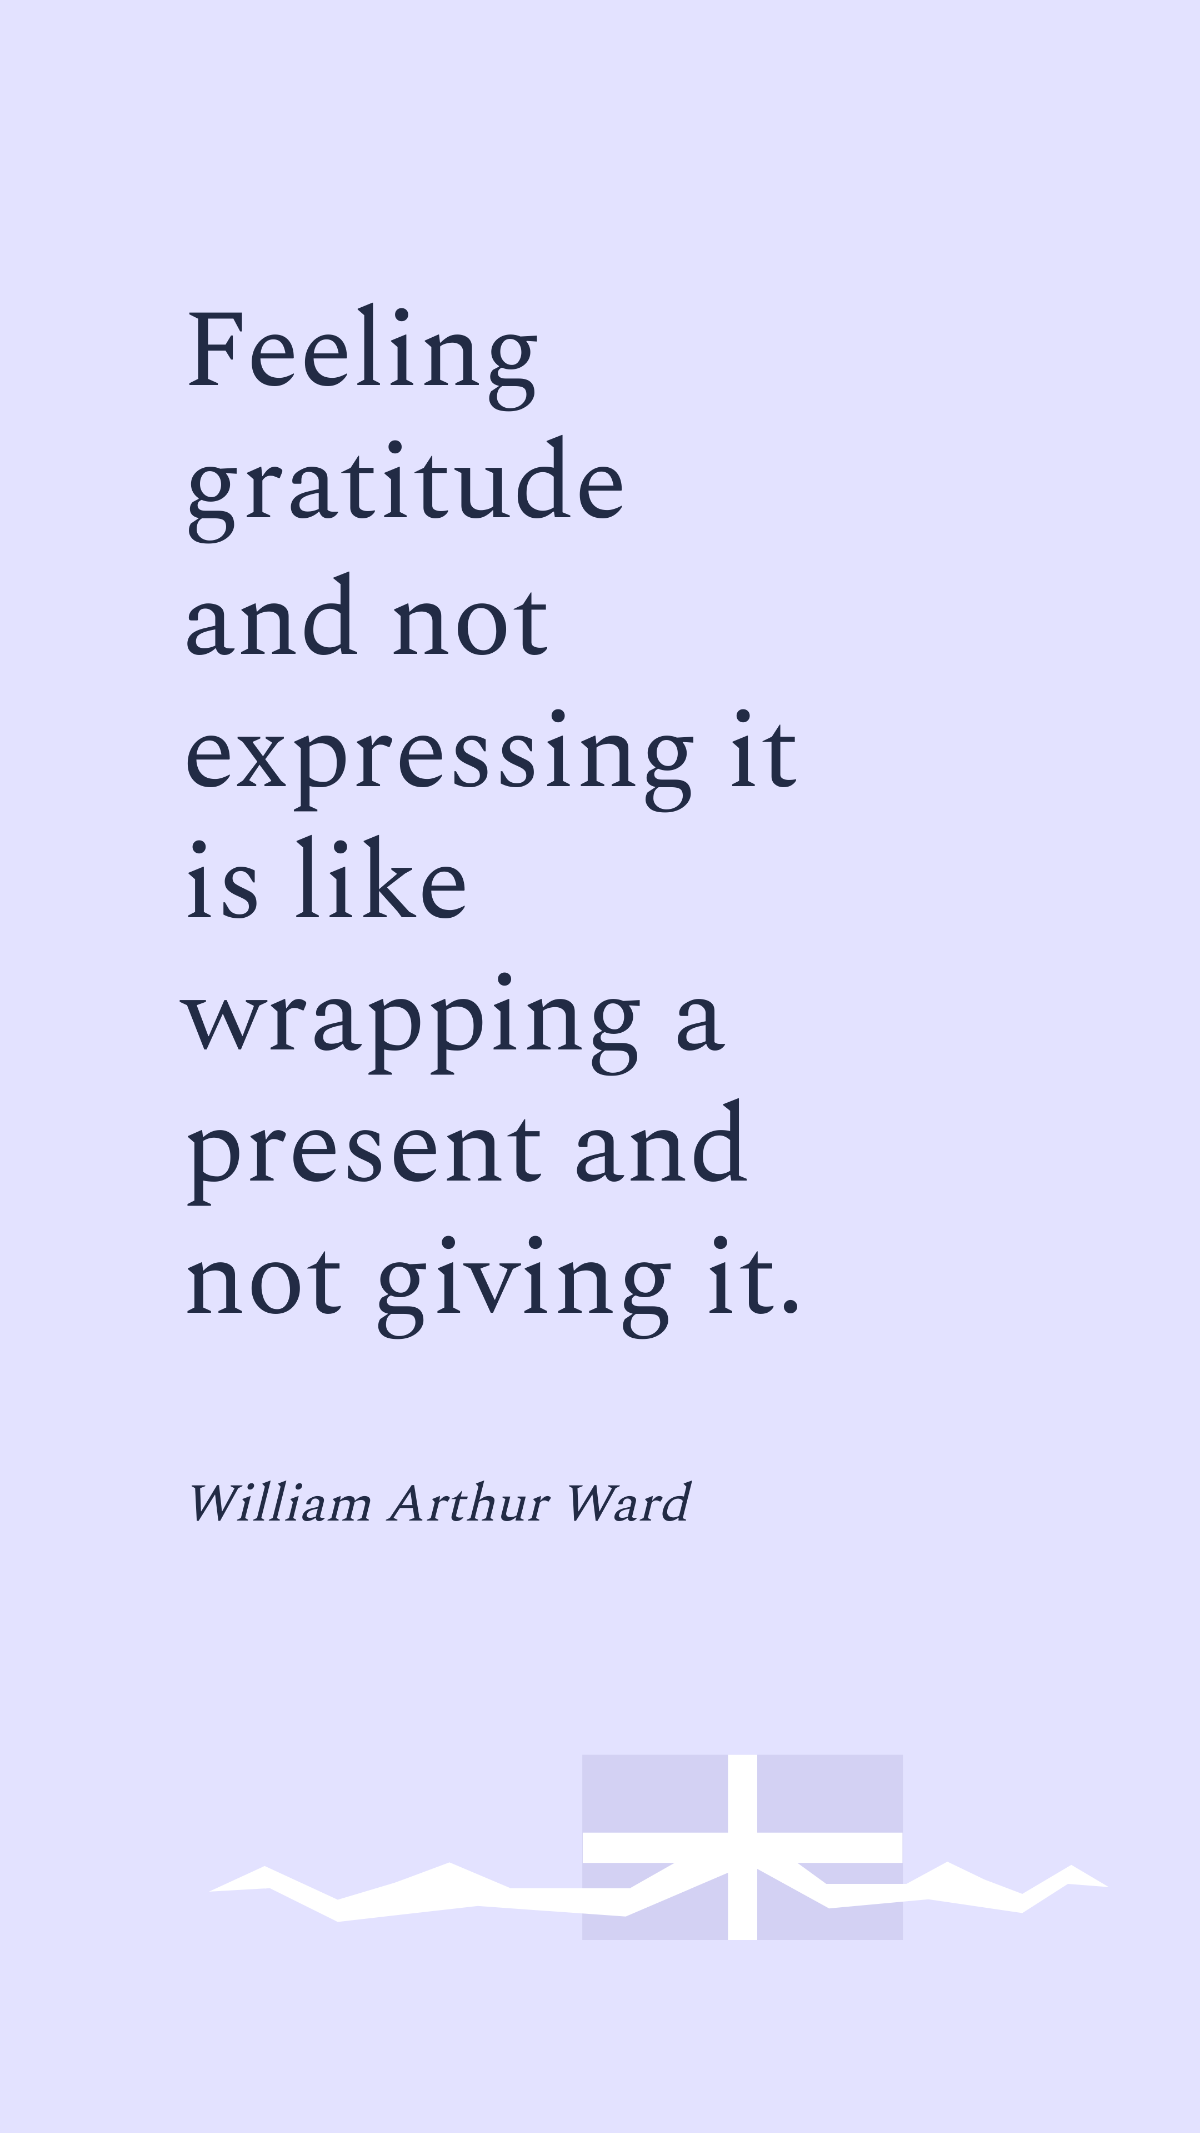 William Arthur Ward - Feeling gratitude and not expressing it is like wrapping a present and not giving it. 